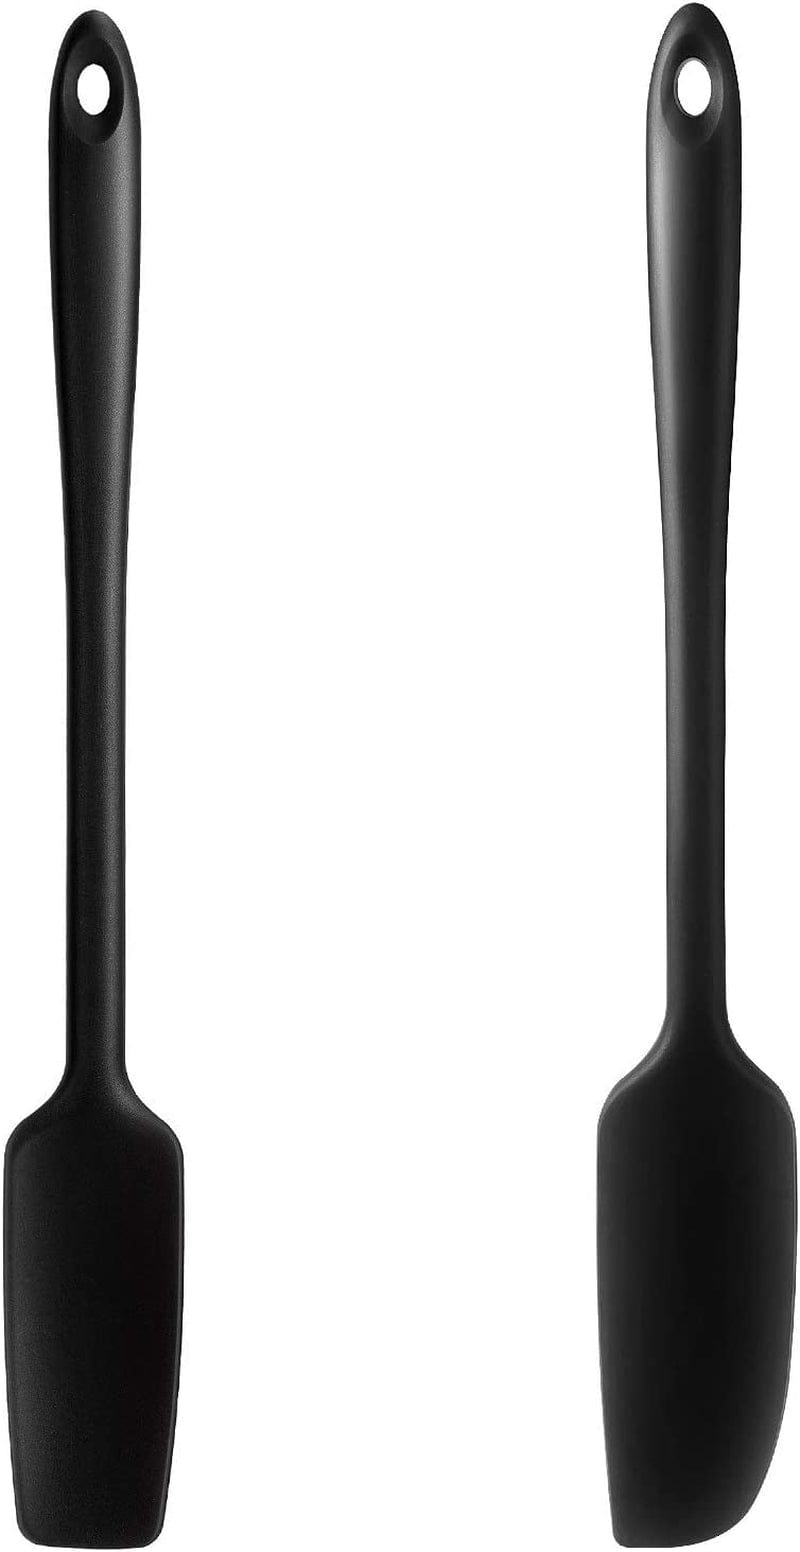 2 Pieces Long Handle Silicone Jar Spatula Non-Stick Rubber Scraper Heat Resistant Spatula Silicone Scraper for Jars, Smoothies, Blenders Cooking Baking Stirring Mixing Tools (Red) Home & Garden > Kitchen & Dining > Kitchen Tools & Utensils Patelai Black  